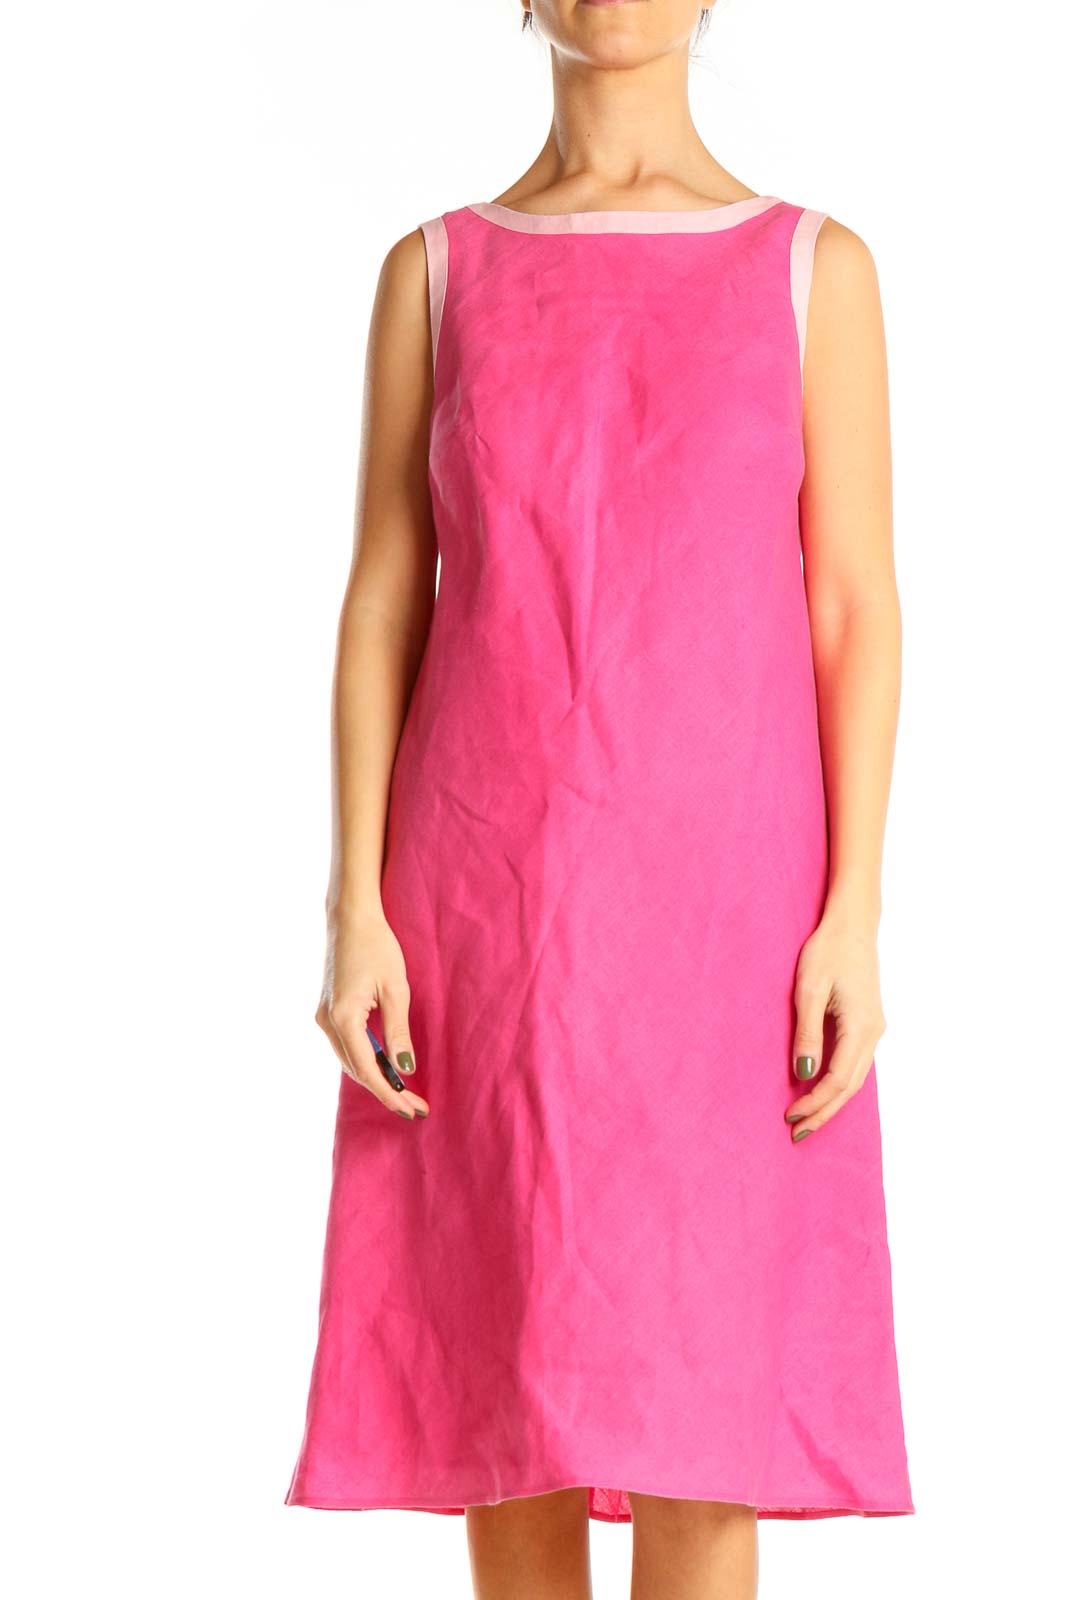 Pink Classic A-Line Dress Front